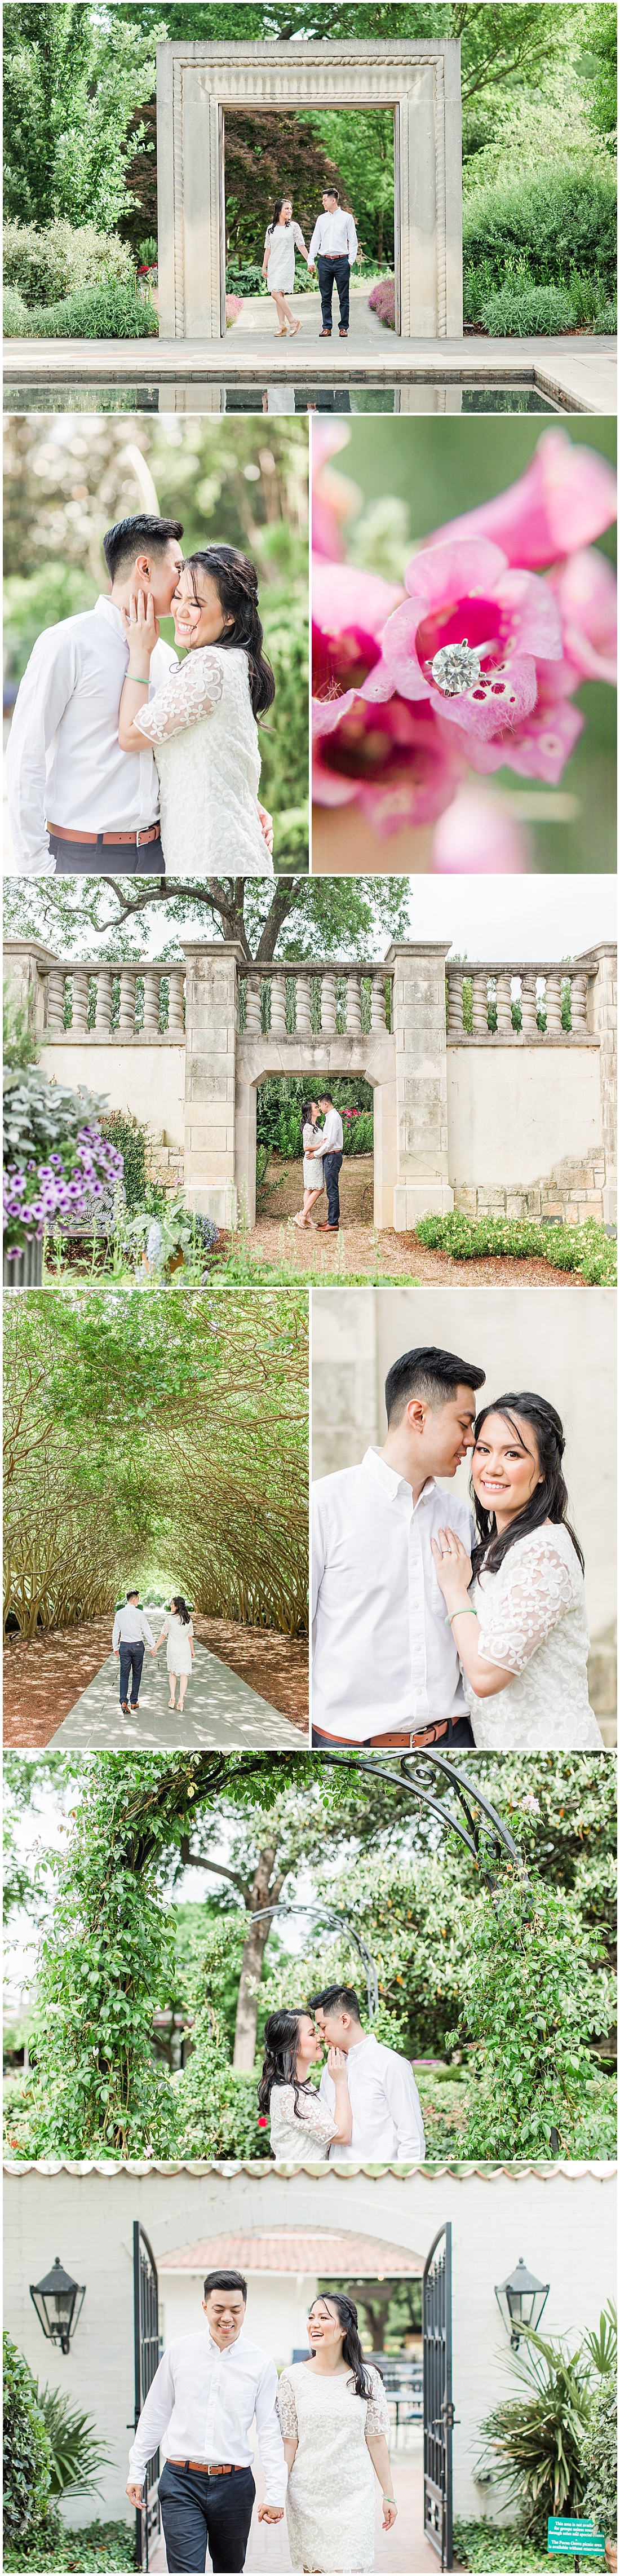 An Elegant Spring Engagement Session at the Dallas Arboretum and Botanical Gardens by Allison Jeffers Wedding Photography 0061